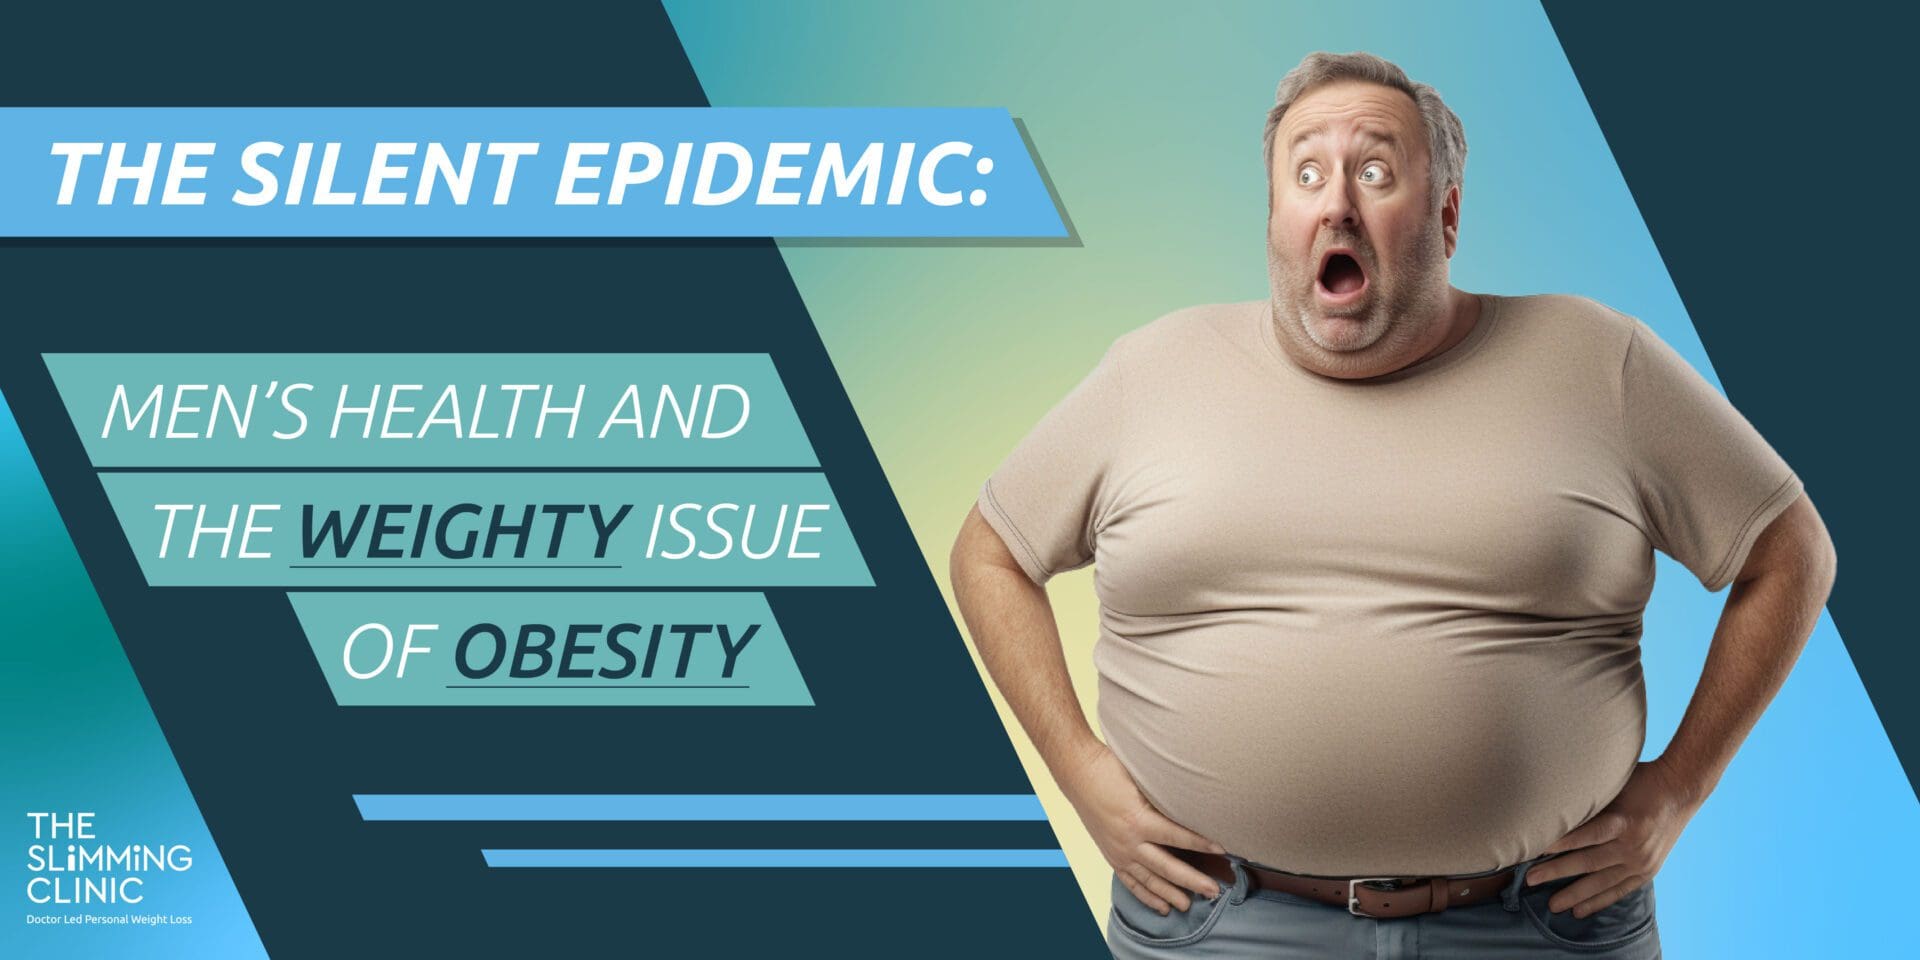 The Silent Epidemic: Men’s Health and the Weighty Issue of Obesity